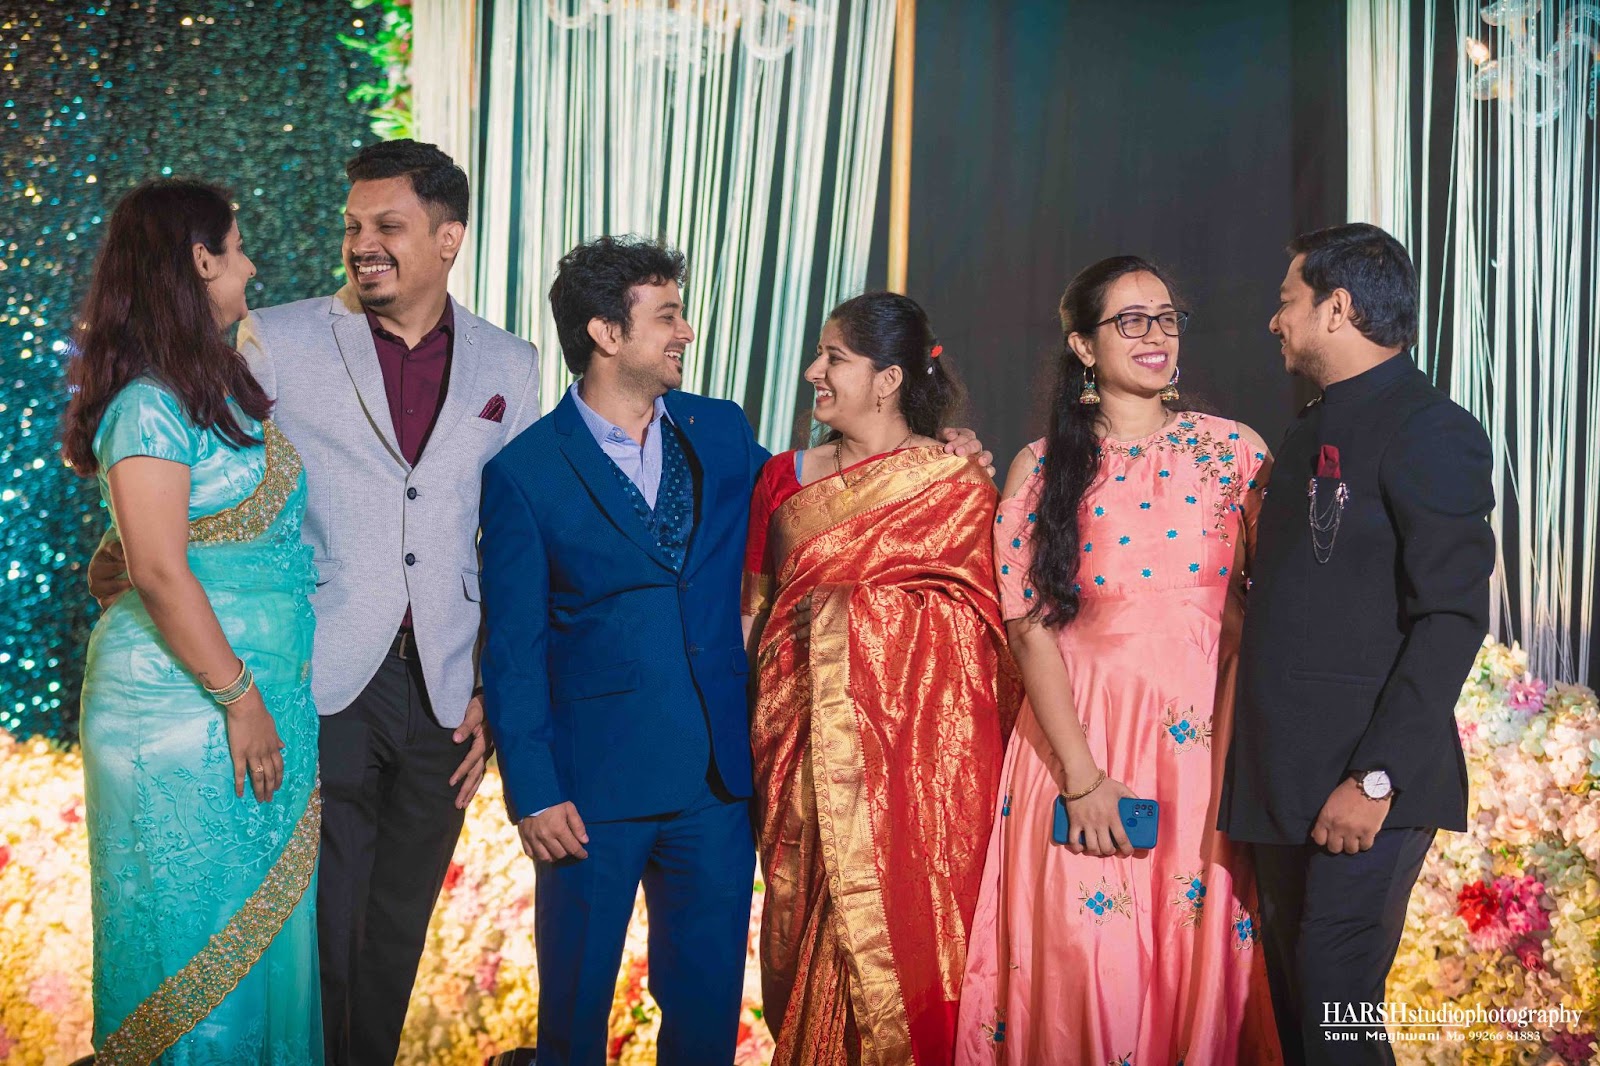 best photographer in indore - Harsh Studio Photography : Group wedding photo with coordinated outfits and height variation